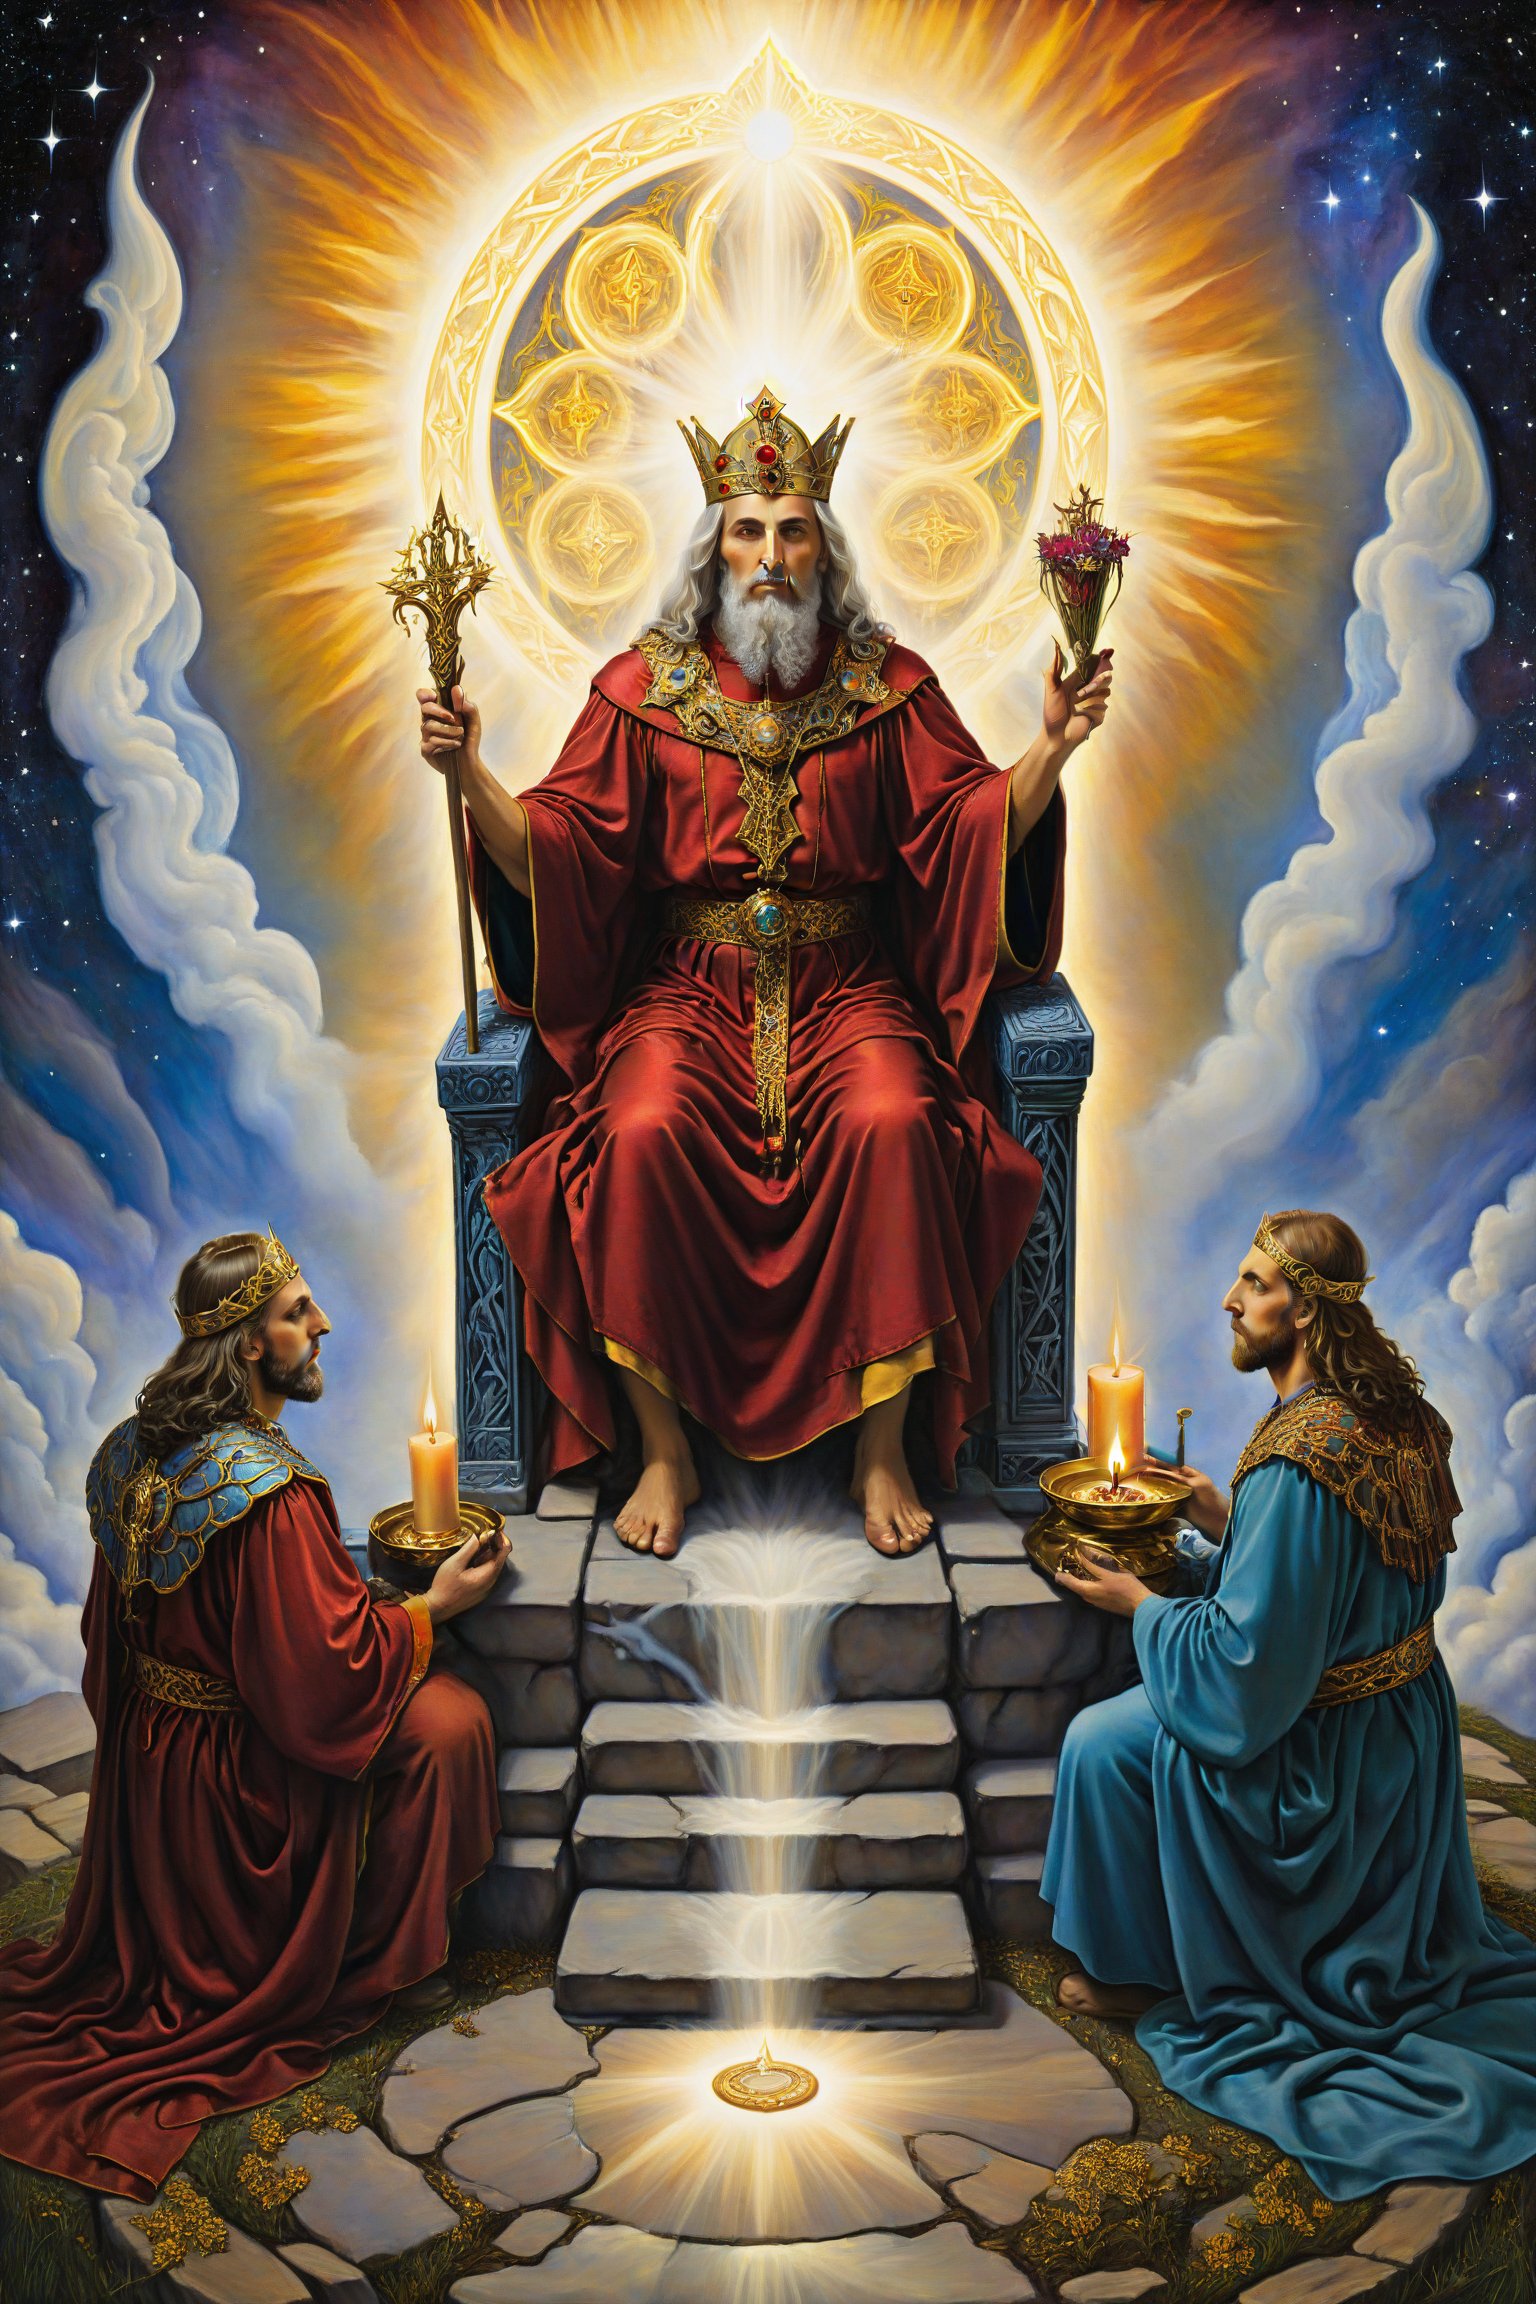  The hierophant card of tarot: A holy man sitting on his throne, imparting spiritual wisdom and tradition, with two acolytes at his feet. artfrahm,visionary art style